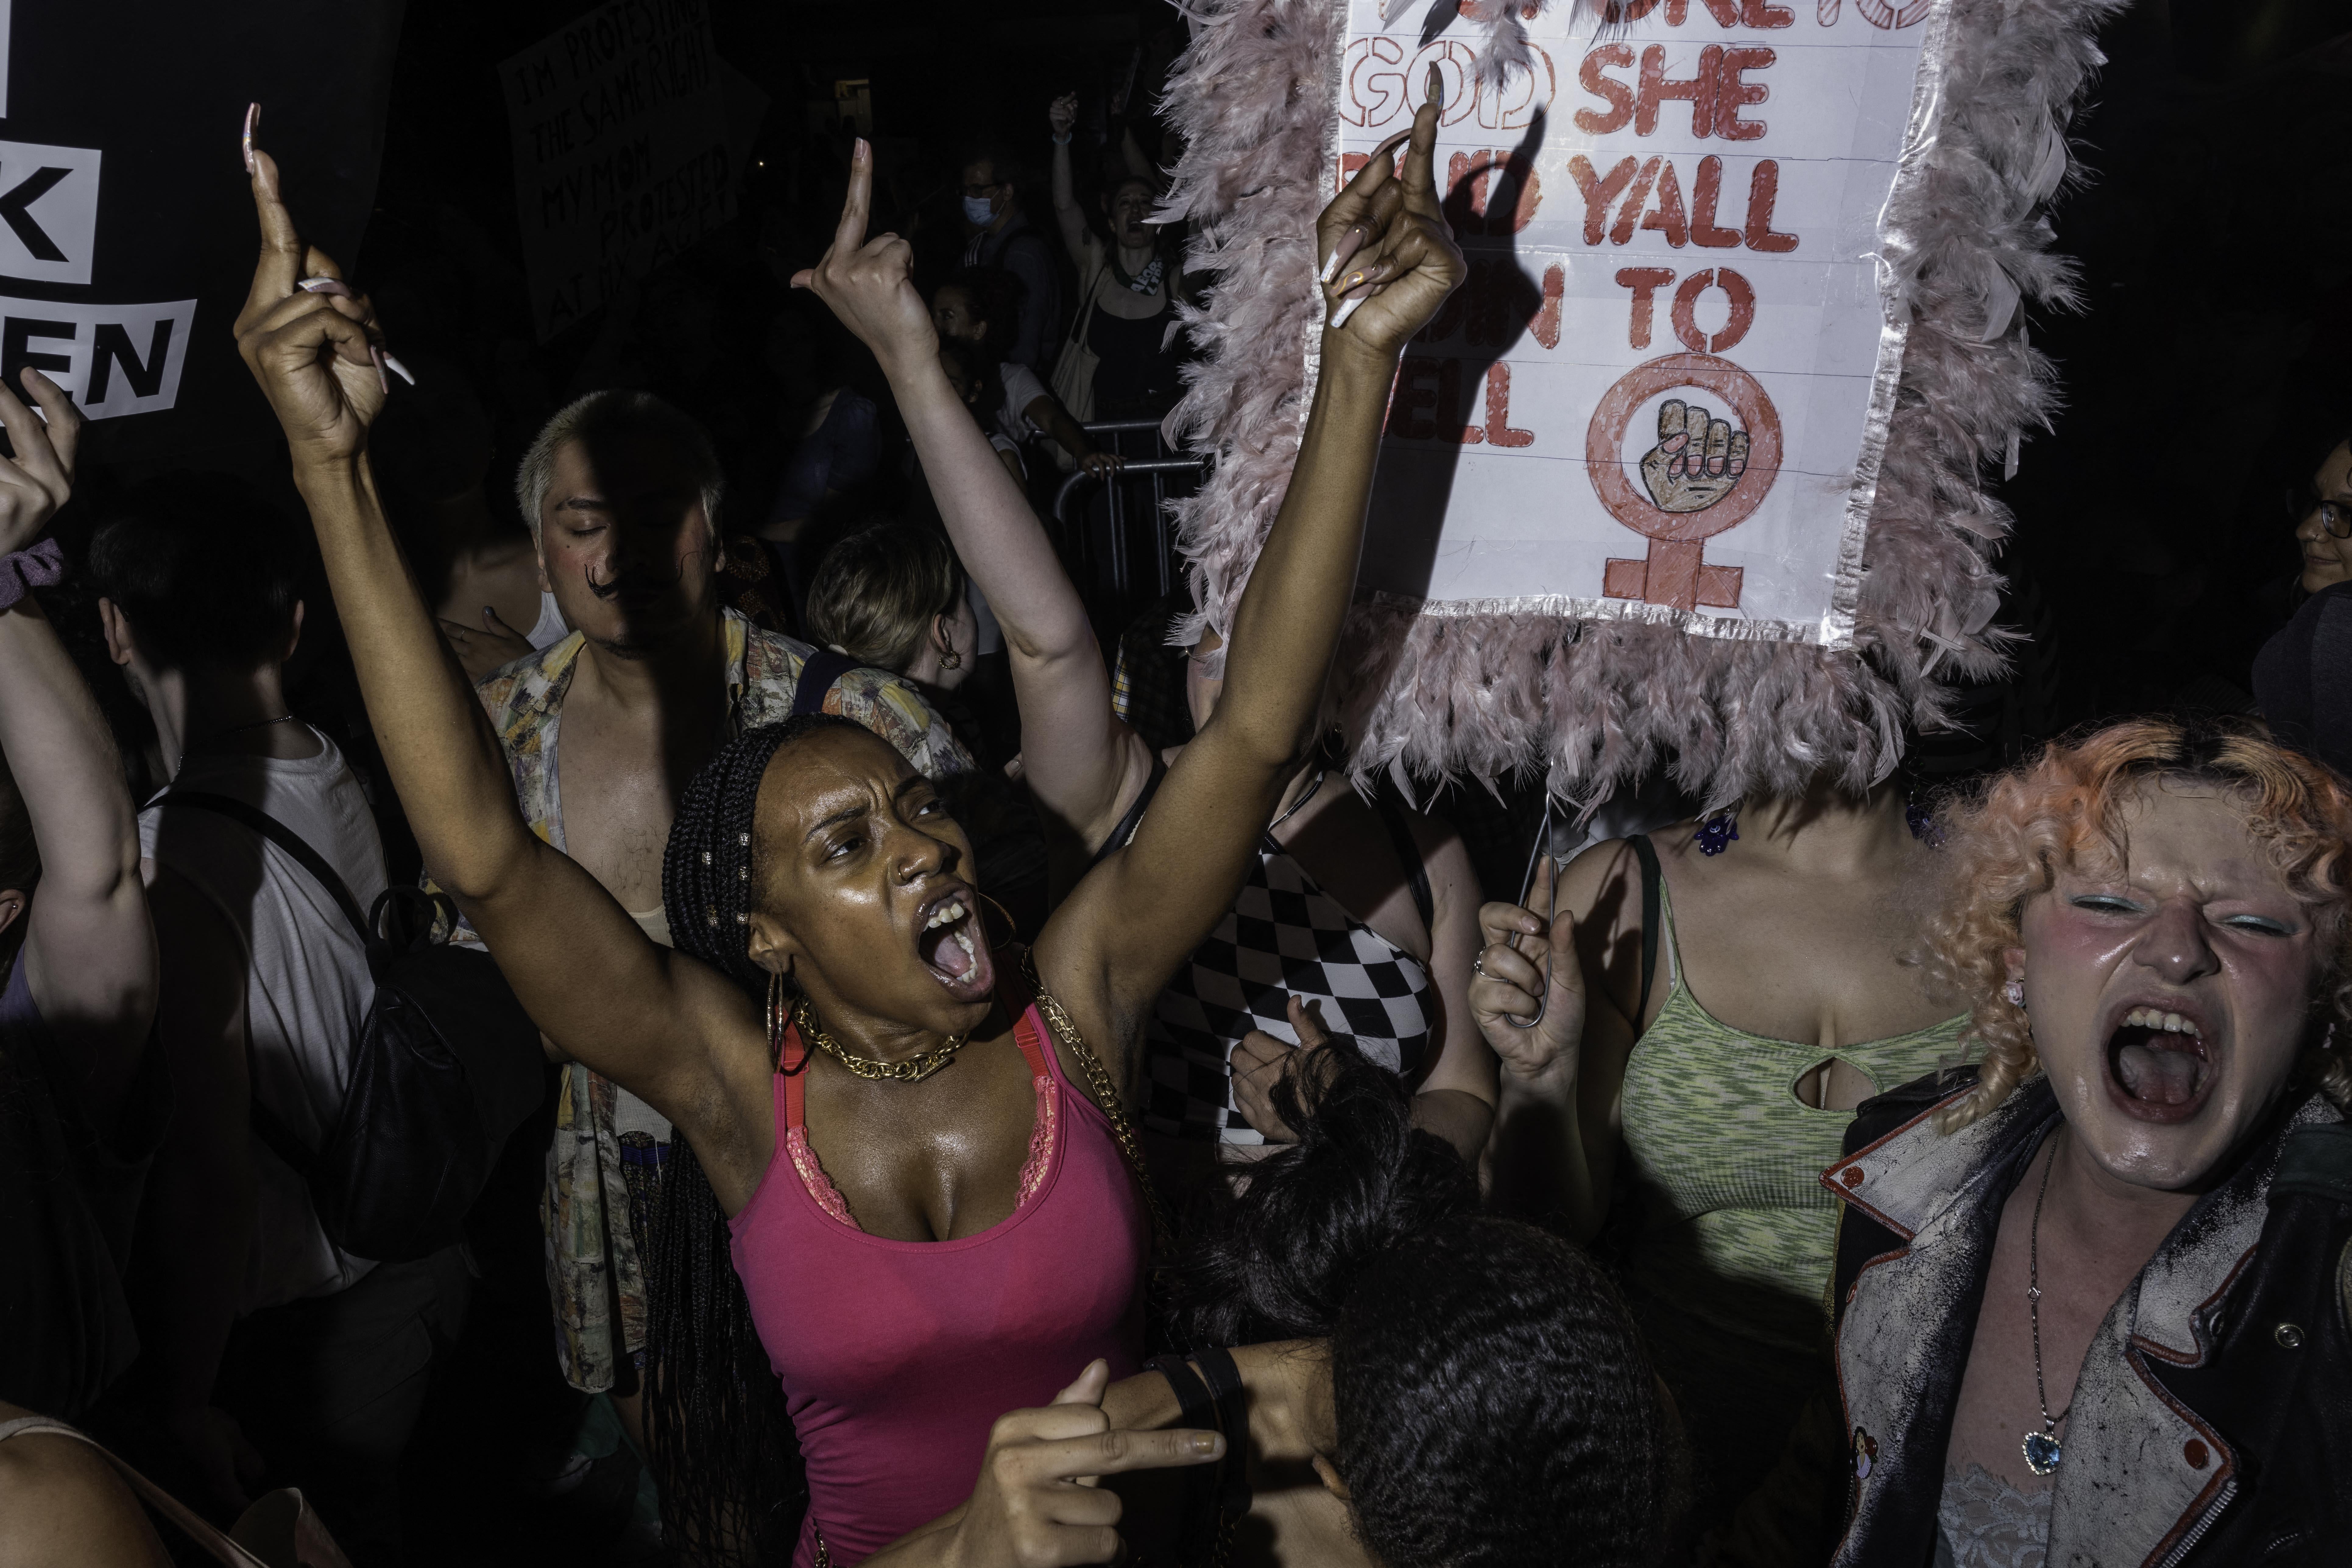 In a crowd, one woman yells while lifting her hands high; a woman next to her holds a sign.